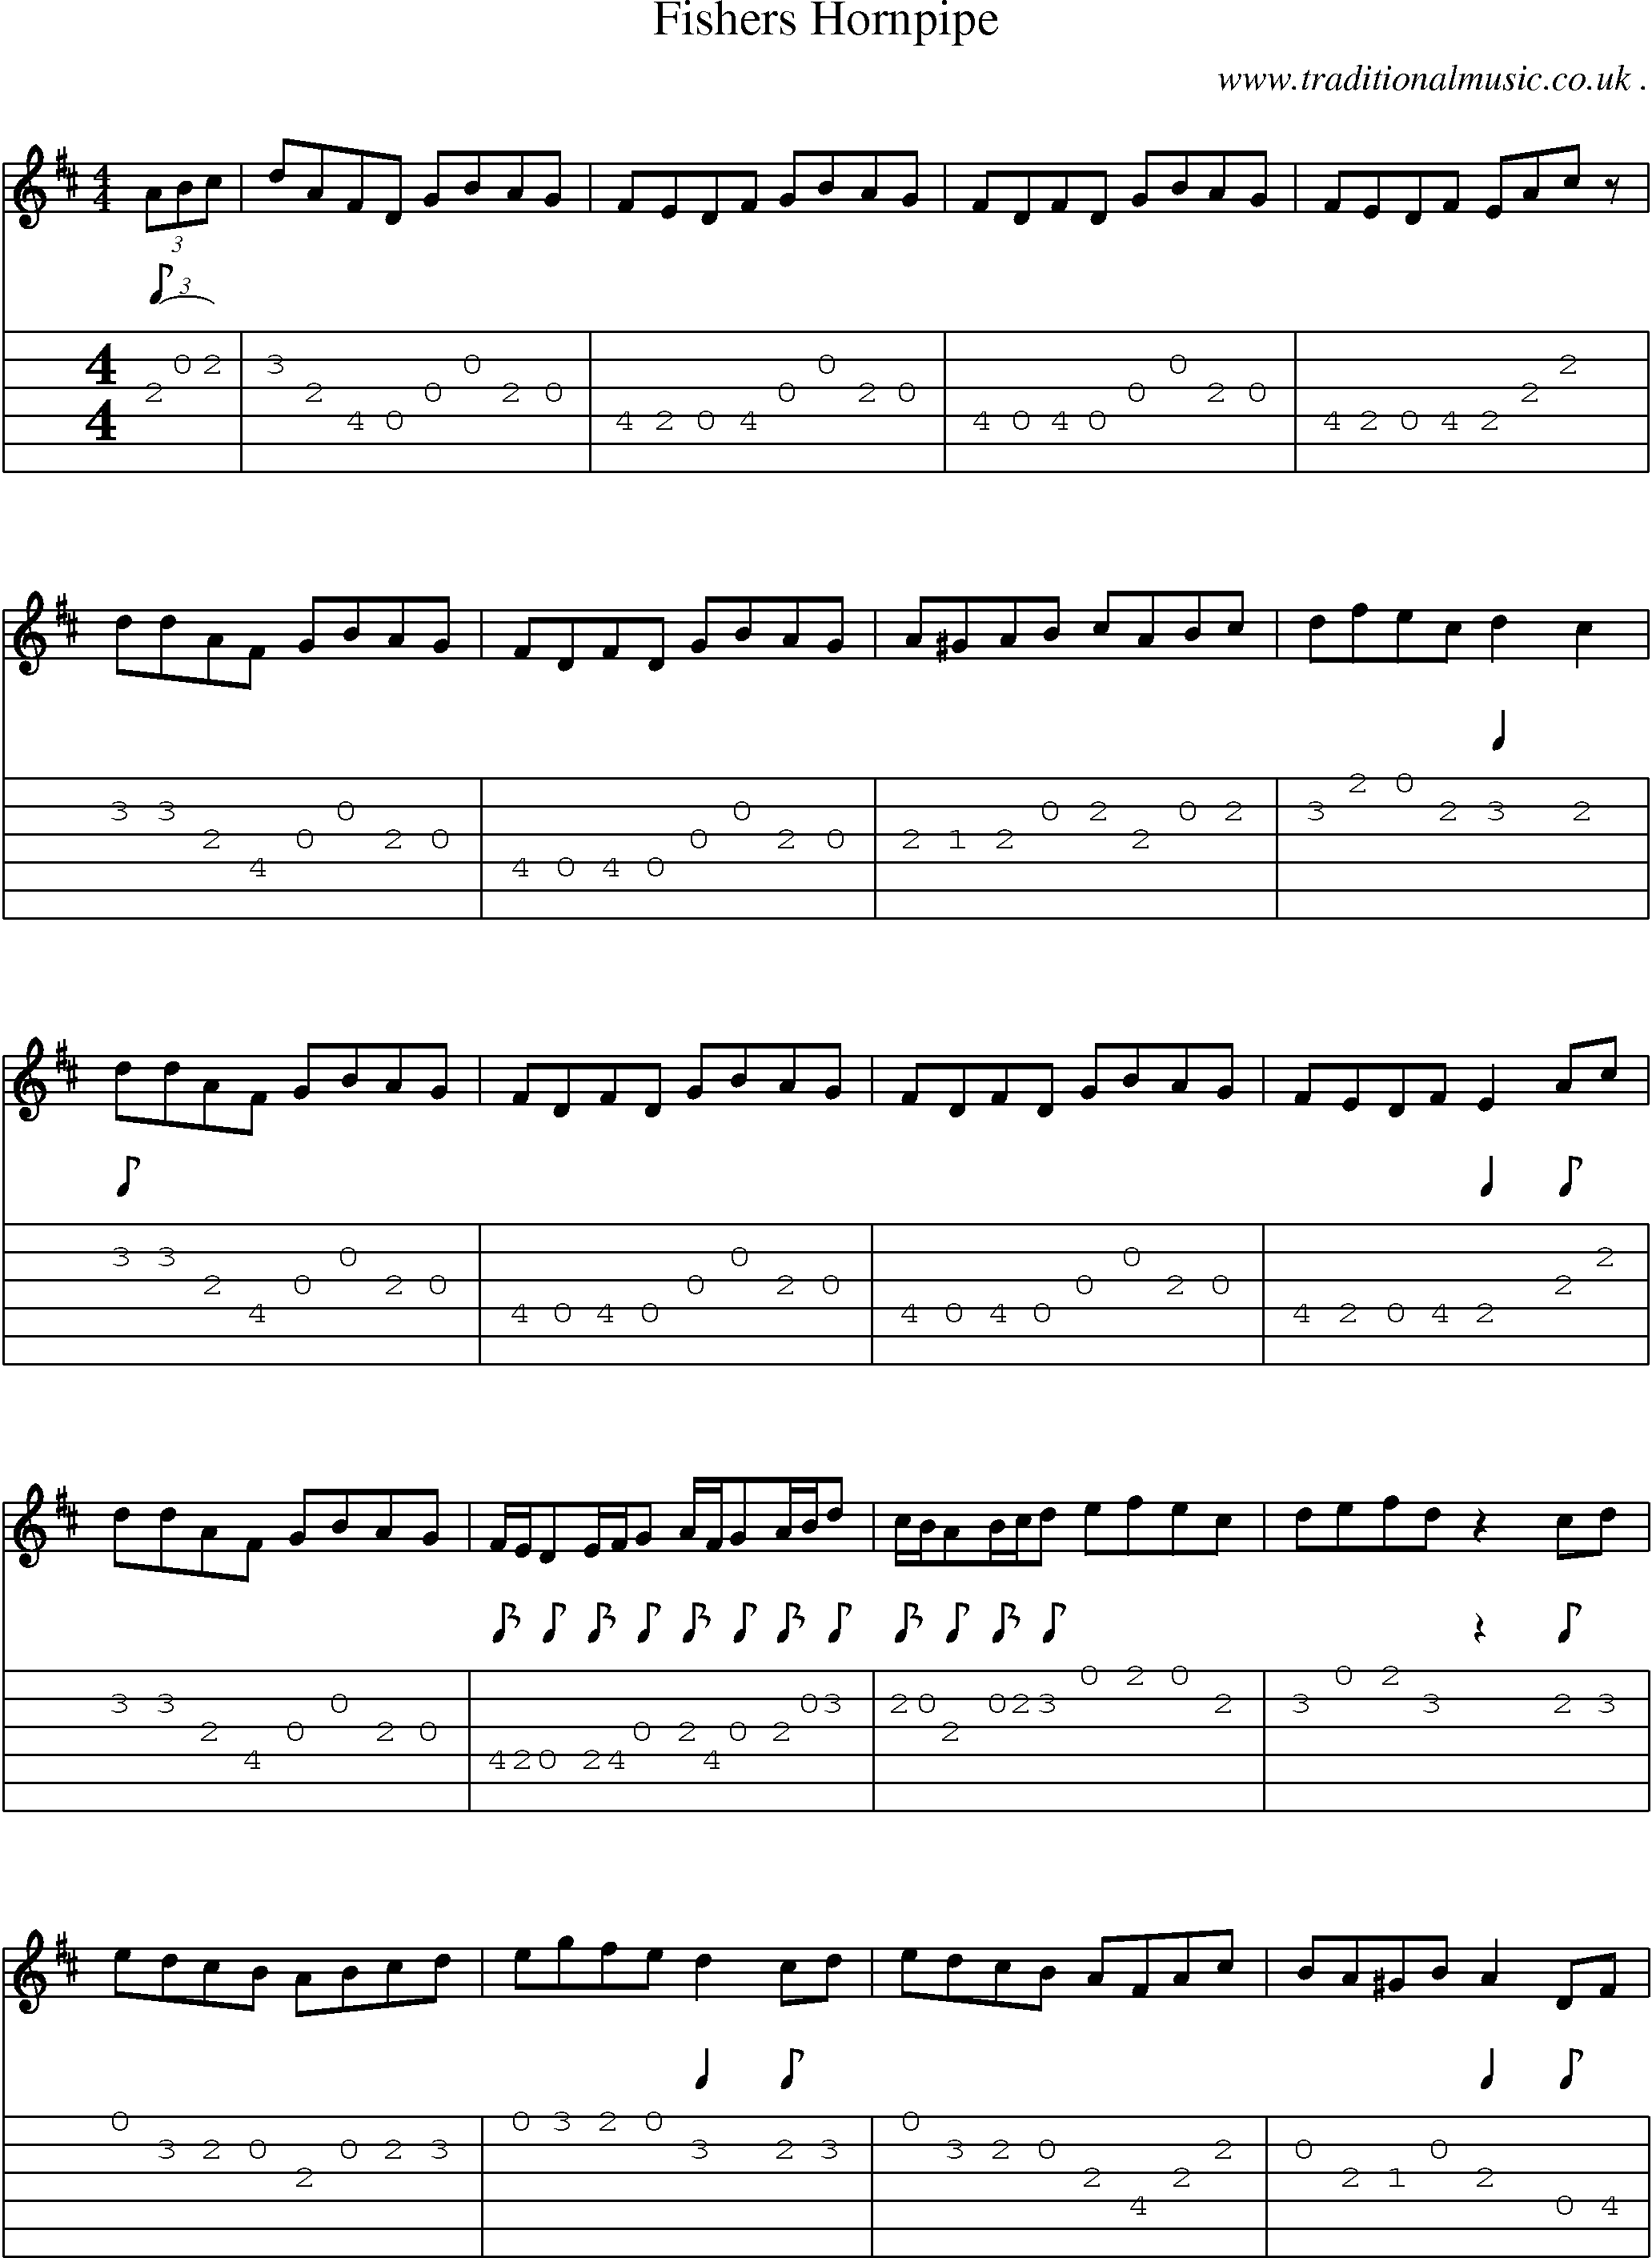 Music Score and Guitar Tabs for Fishers Hornpipe2